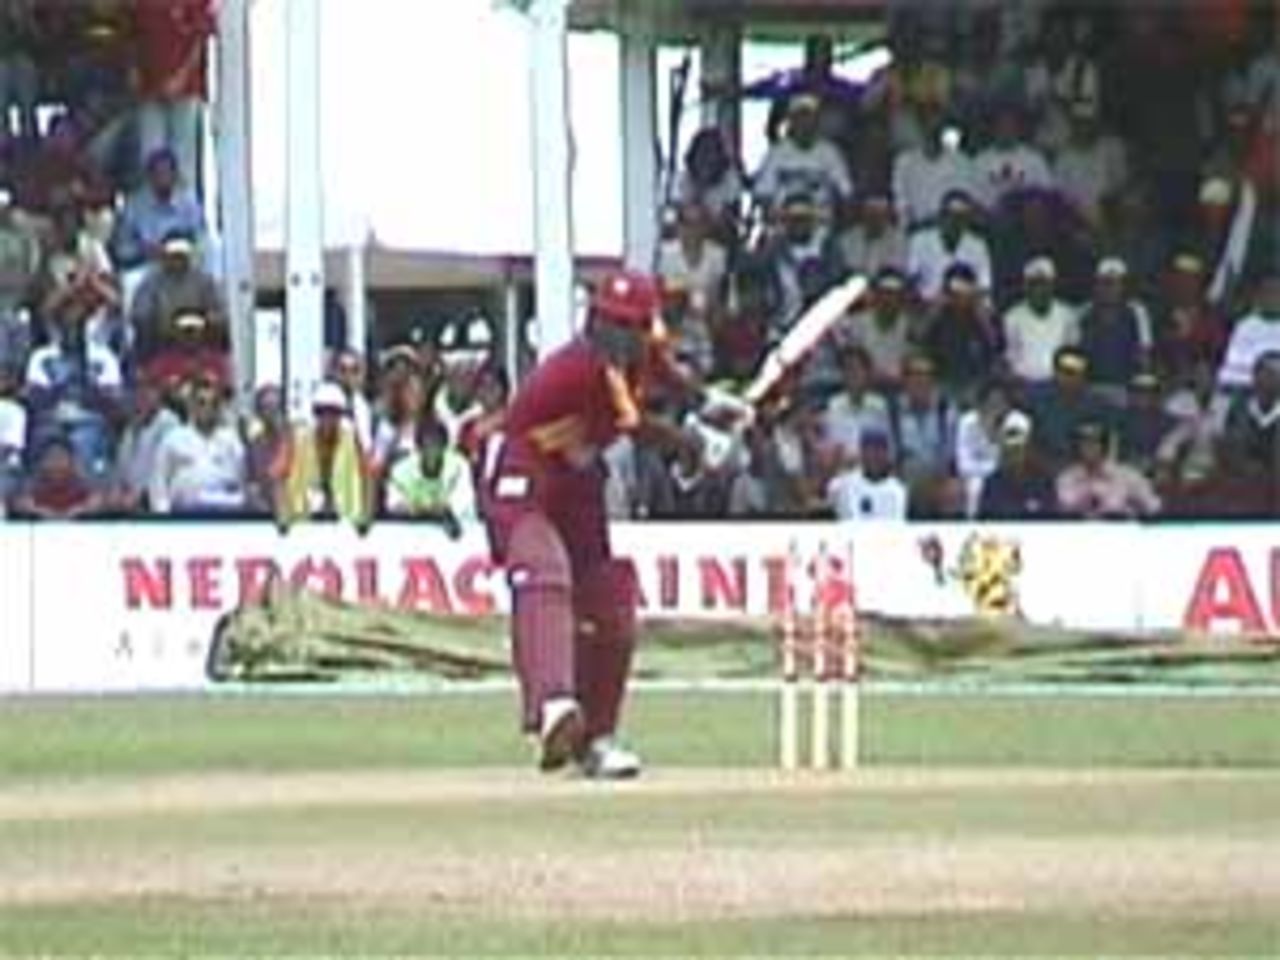 Chanderpaul launches into a drive, India v West Indies (3rd ODI), Coca-Cola Singapore Challenge, 1999-2000, Kallang Ground, Singapore, 5 Sep 1999.